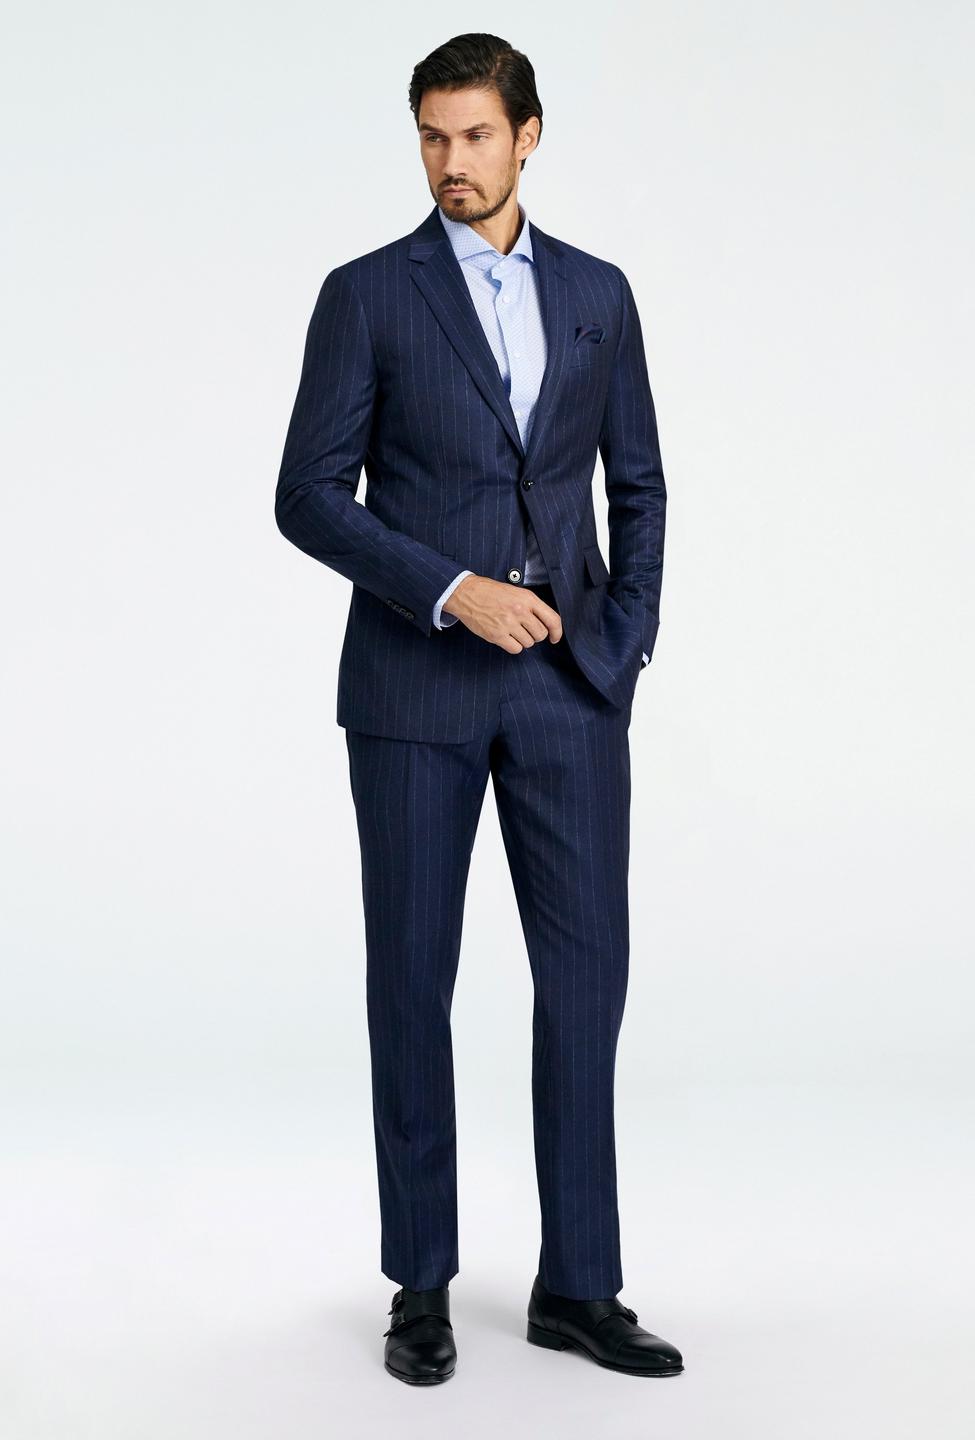 Blue suit - Reigate Striped Design from Seasonal Indochino Collection